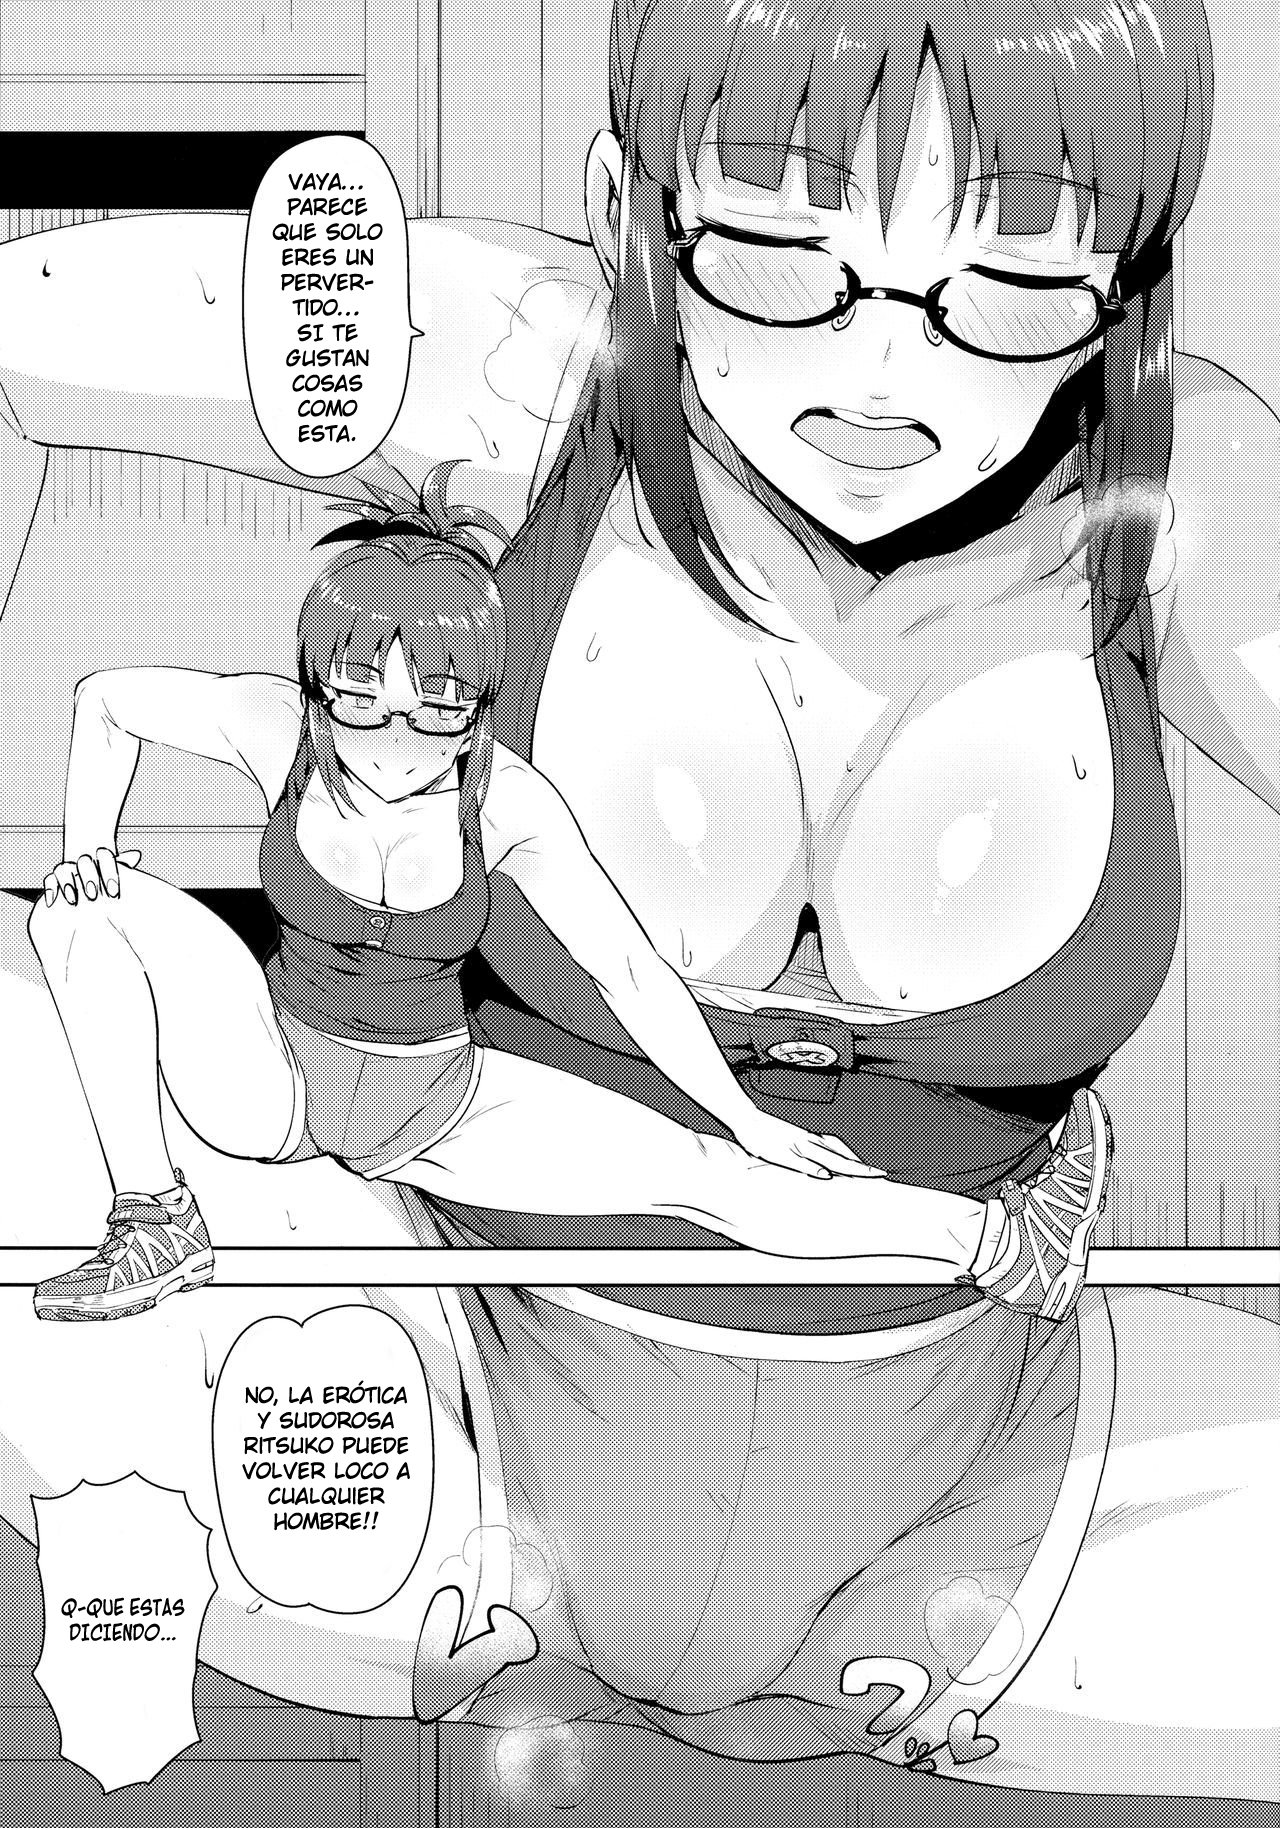 Stretching with Ritsuko - 7